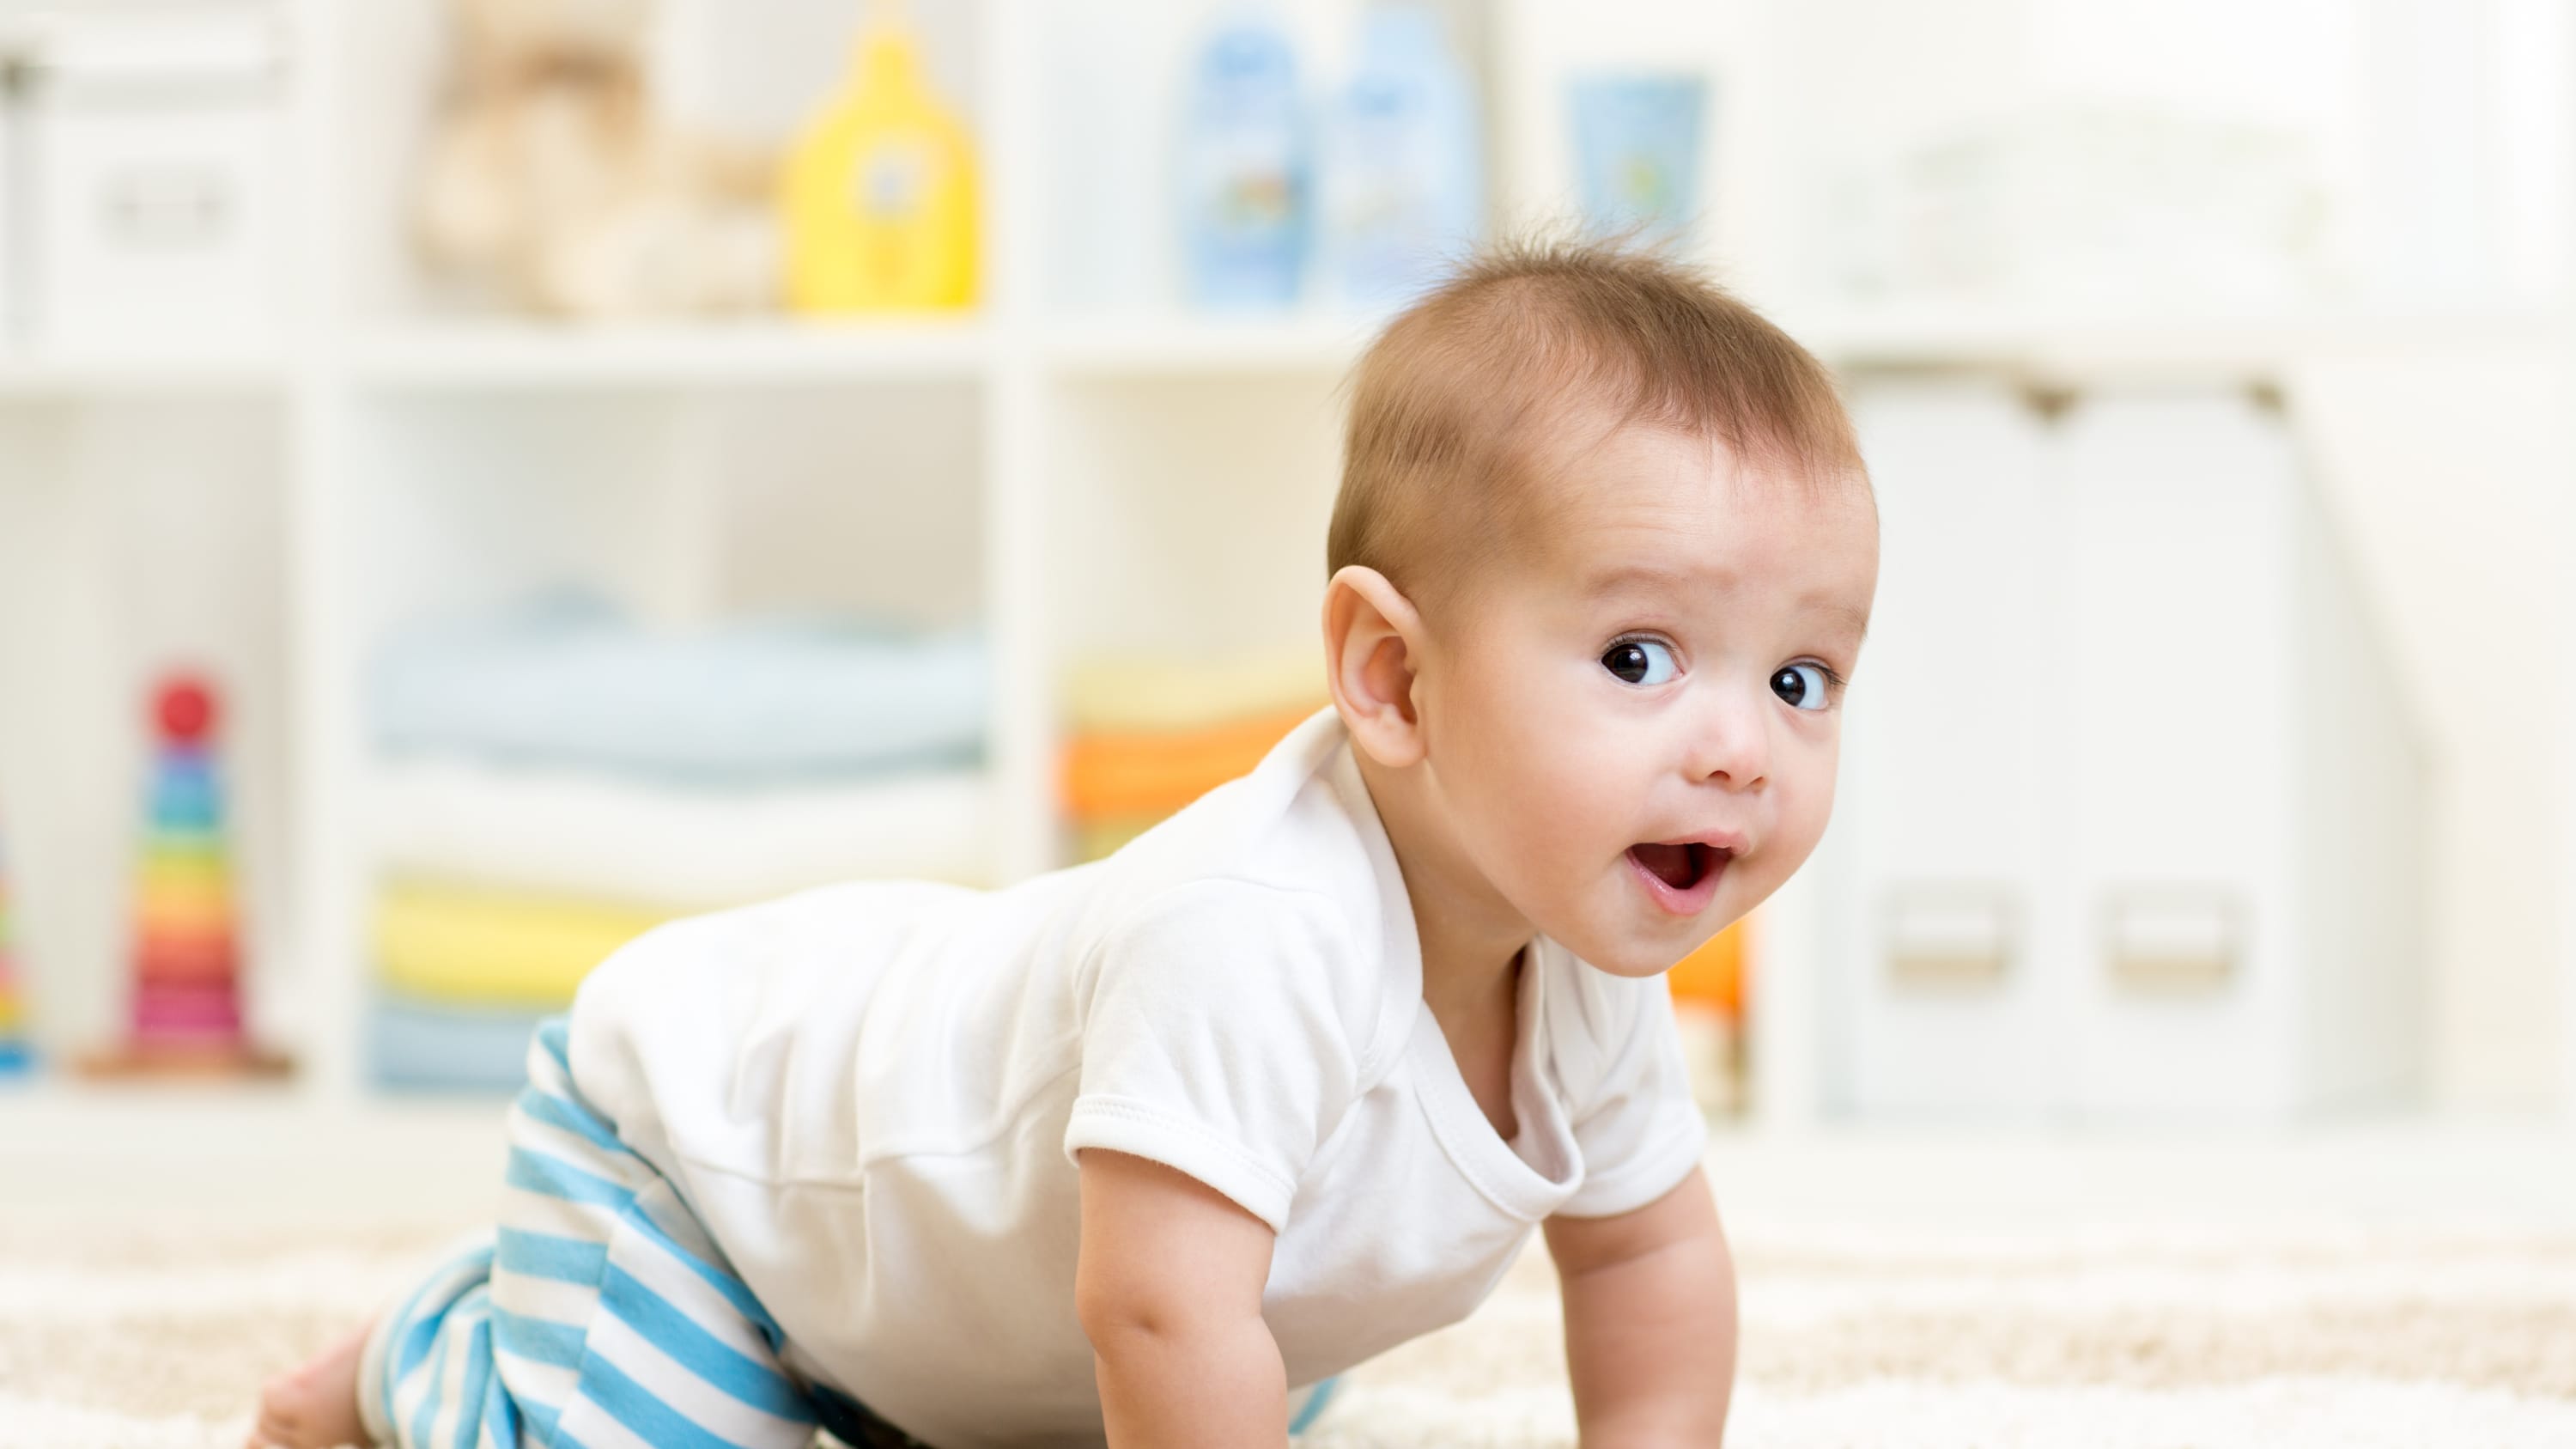 An infant who may have child development issues crawls on the floor.